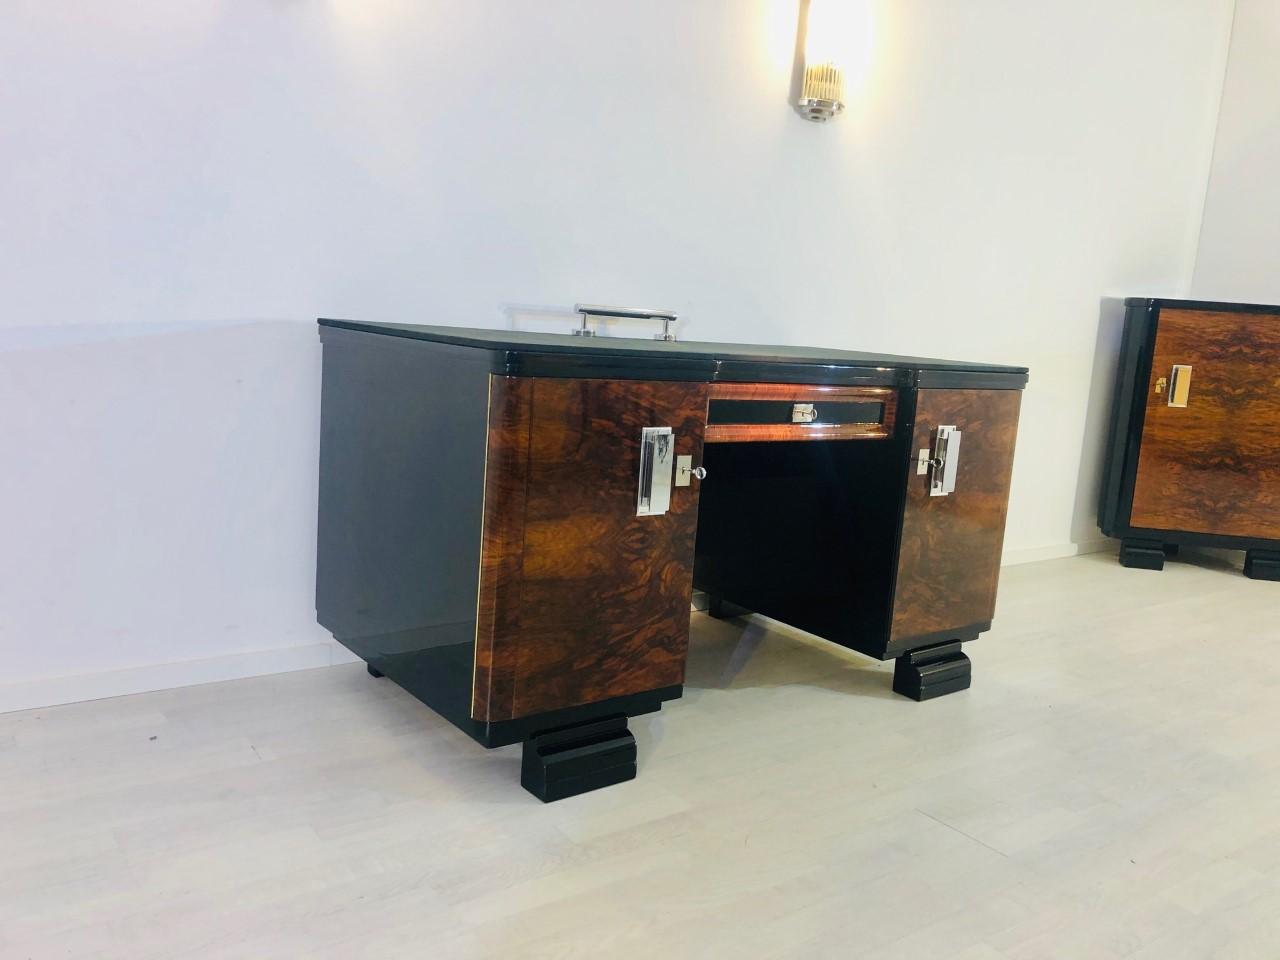 Amazing original Art Deco desk from the glamourous 1920s made of walnut wood. This one of a kind French masterpiece convinces with its perfect, restored condition and with its doors made of beautiful walnut burl. The desktop got covered with a